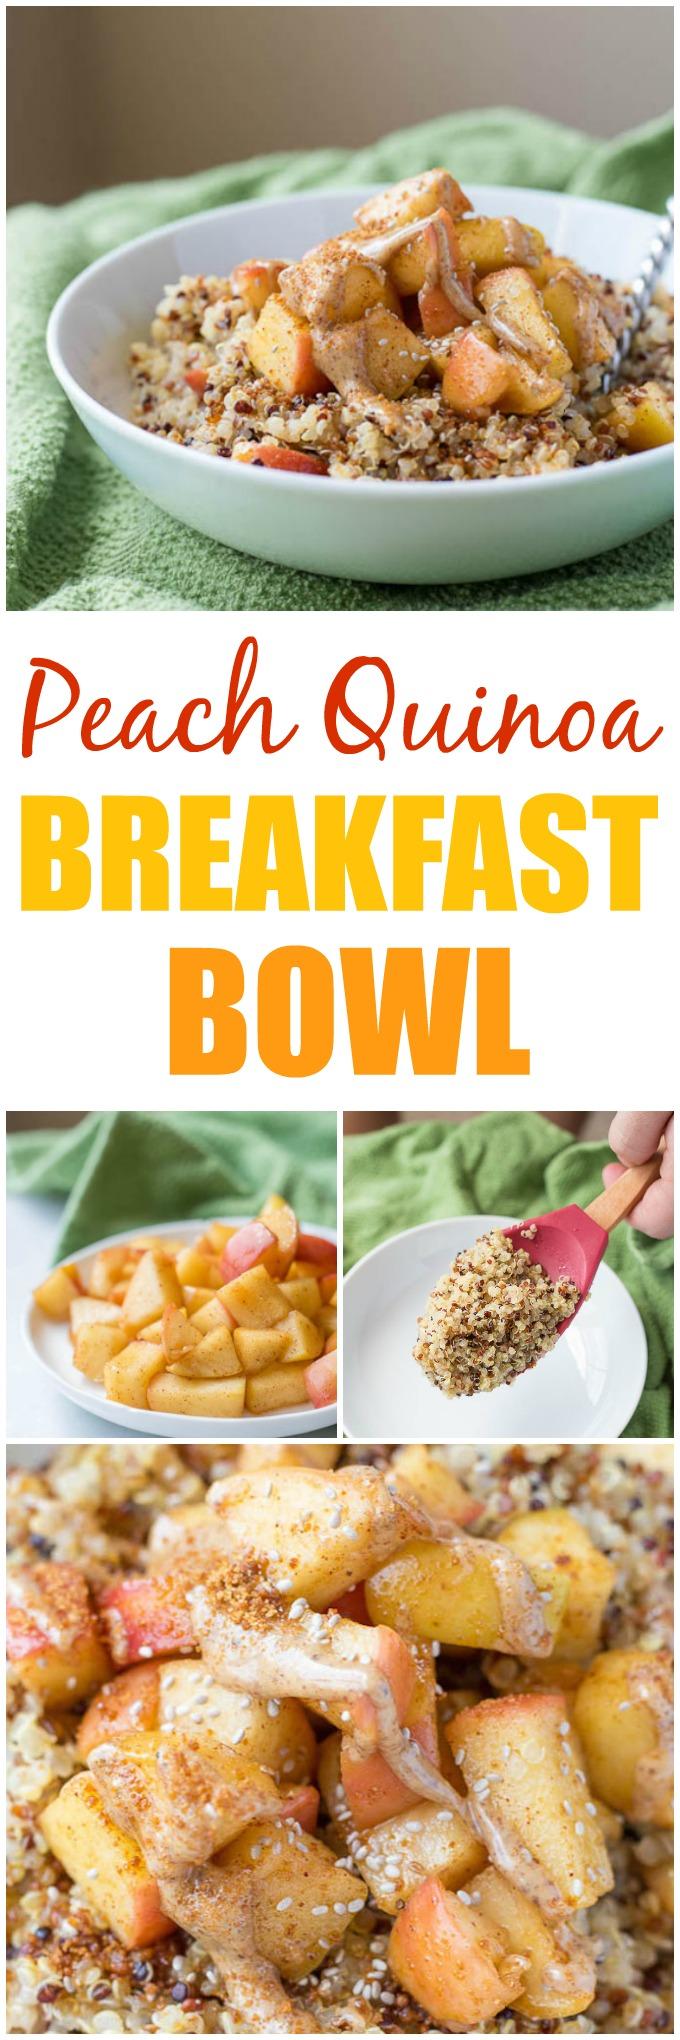 This Caramelized Peach and Quinoa Breakfast Bowl is packed with protein and makes a great summer breakfast.